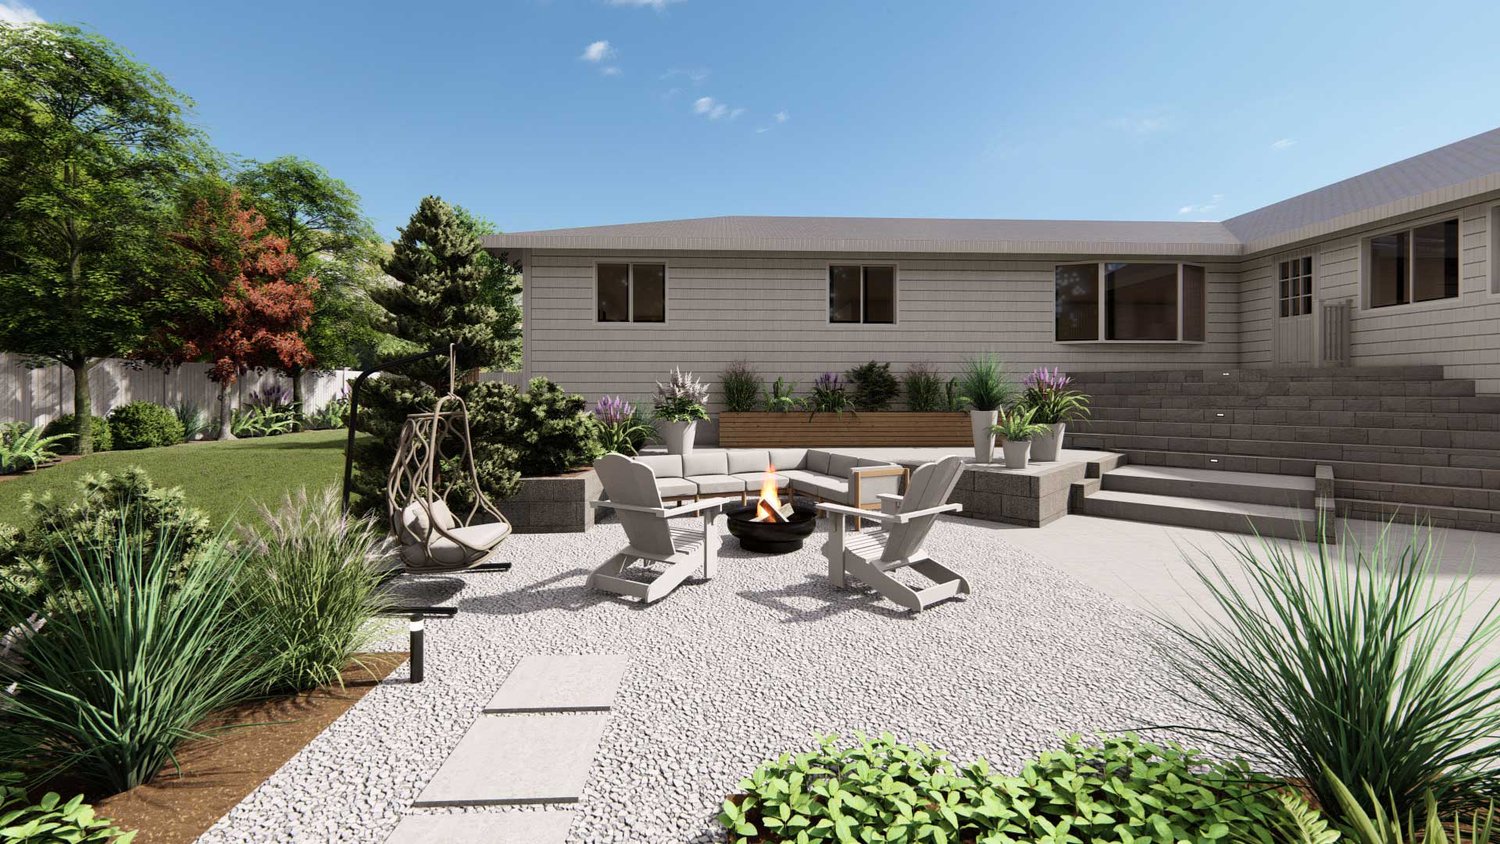 Cambridge yard with graveled floors and sitting area, fire pit and plants in different areas of the yard